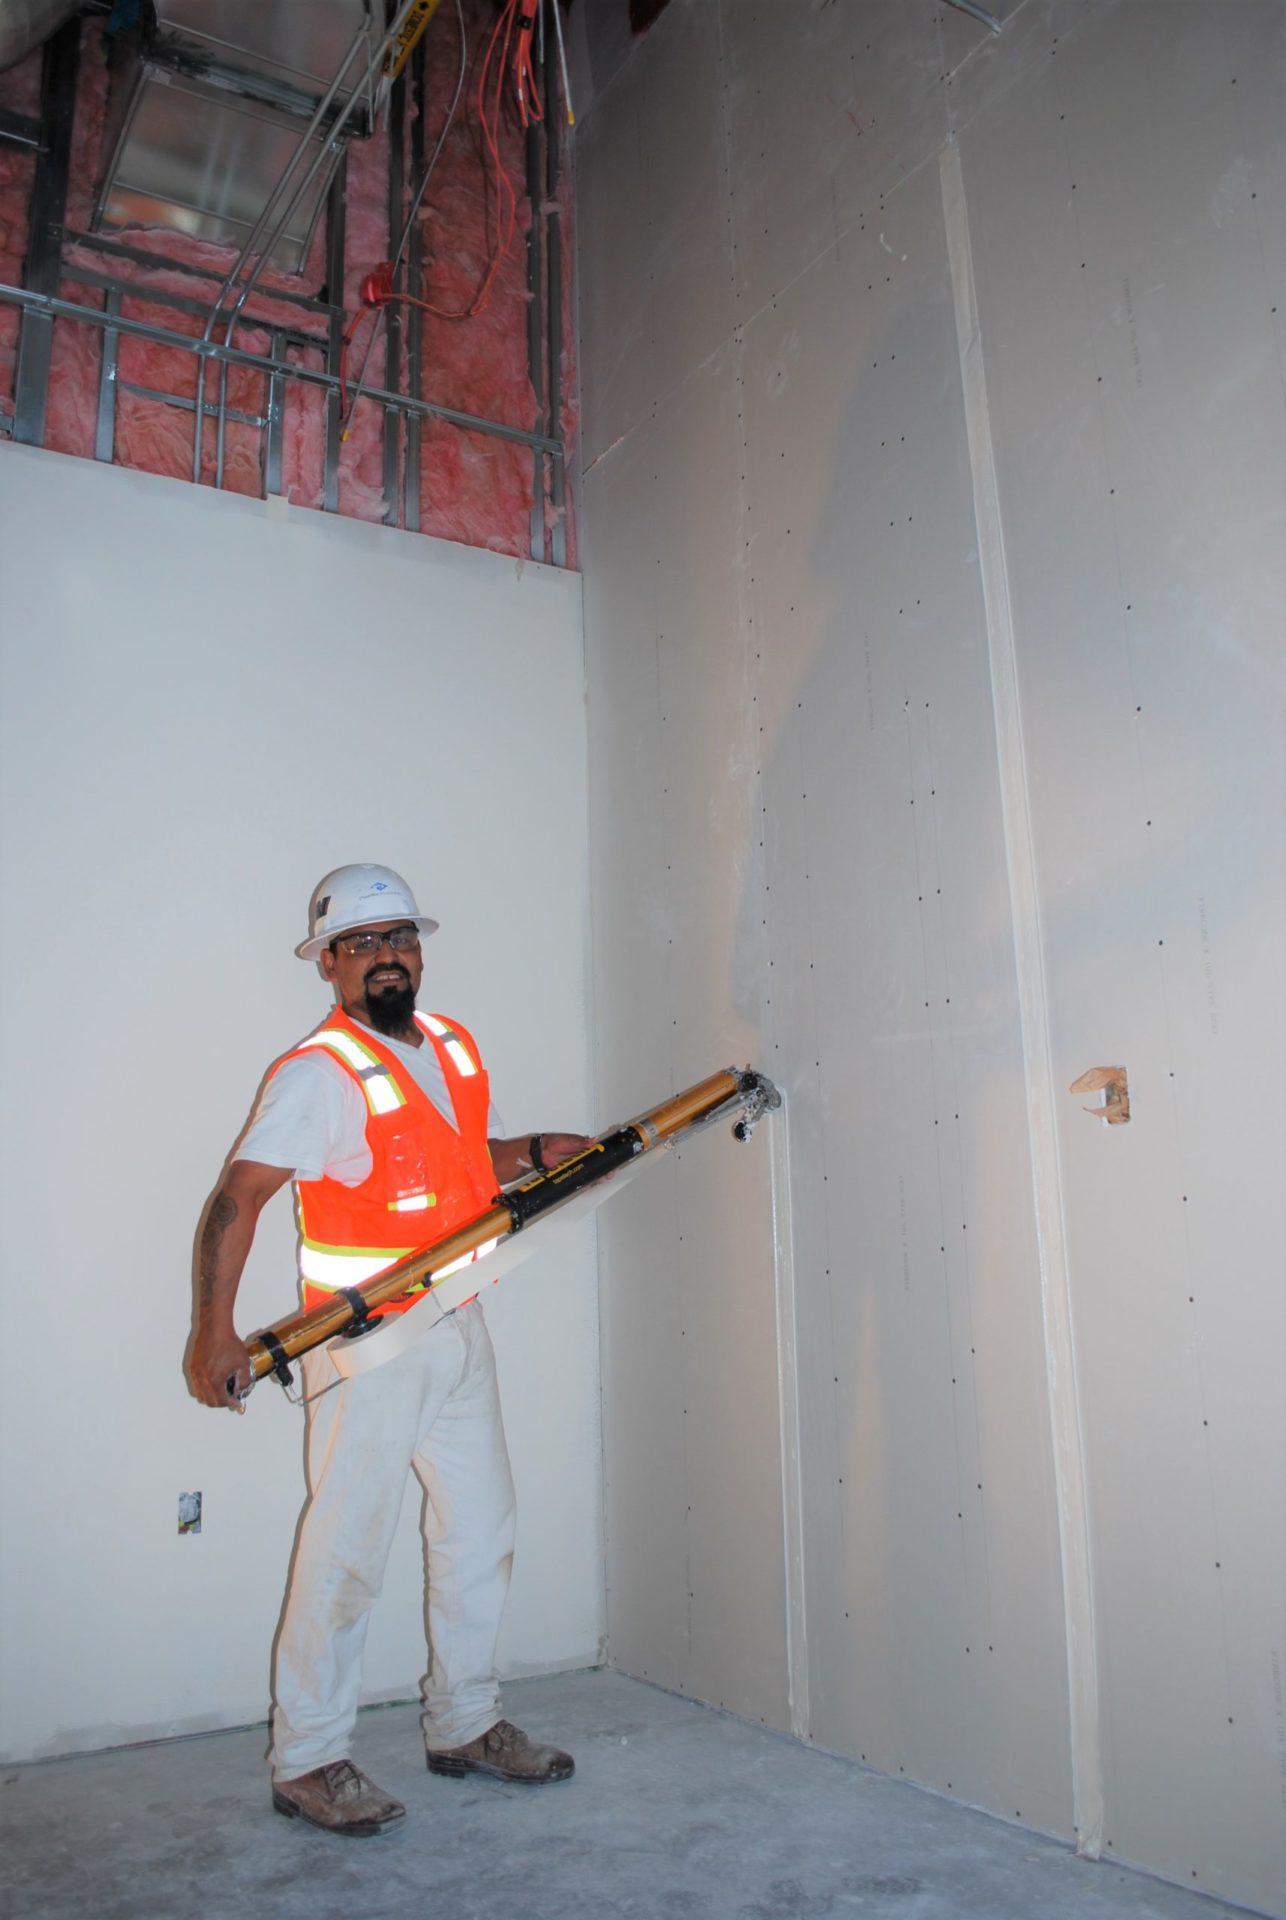 Image from the Gallery: Drywall Finishers 2017